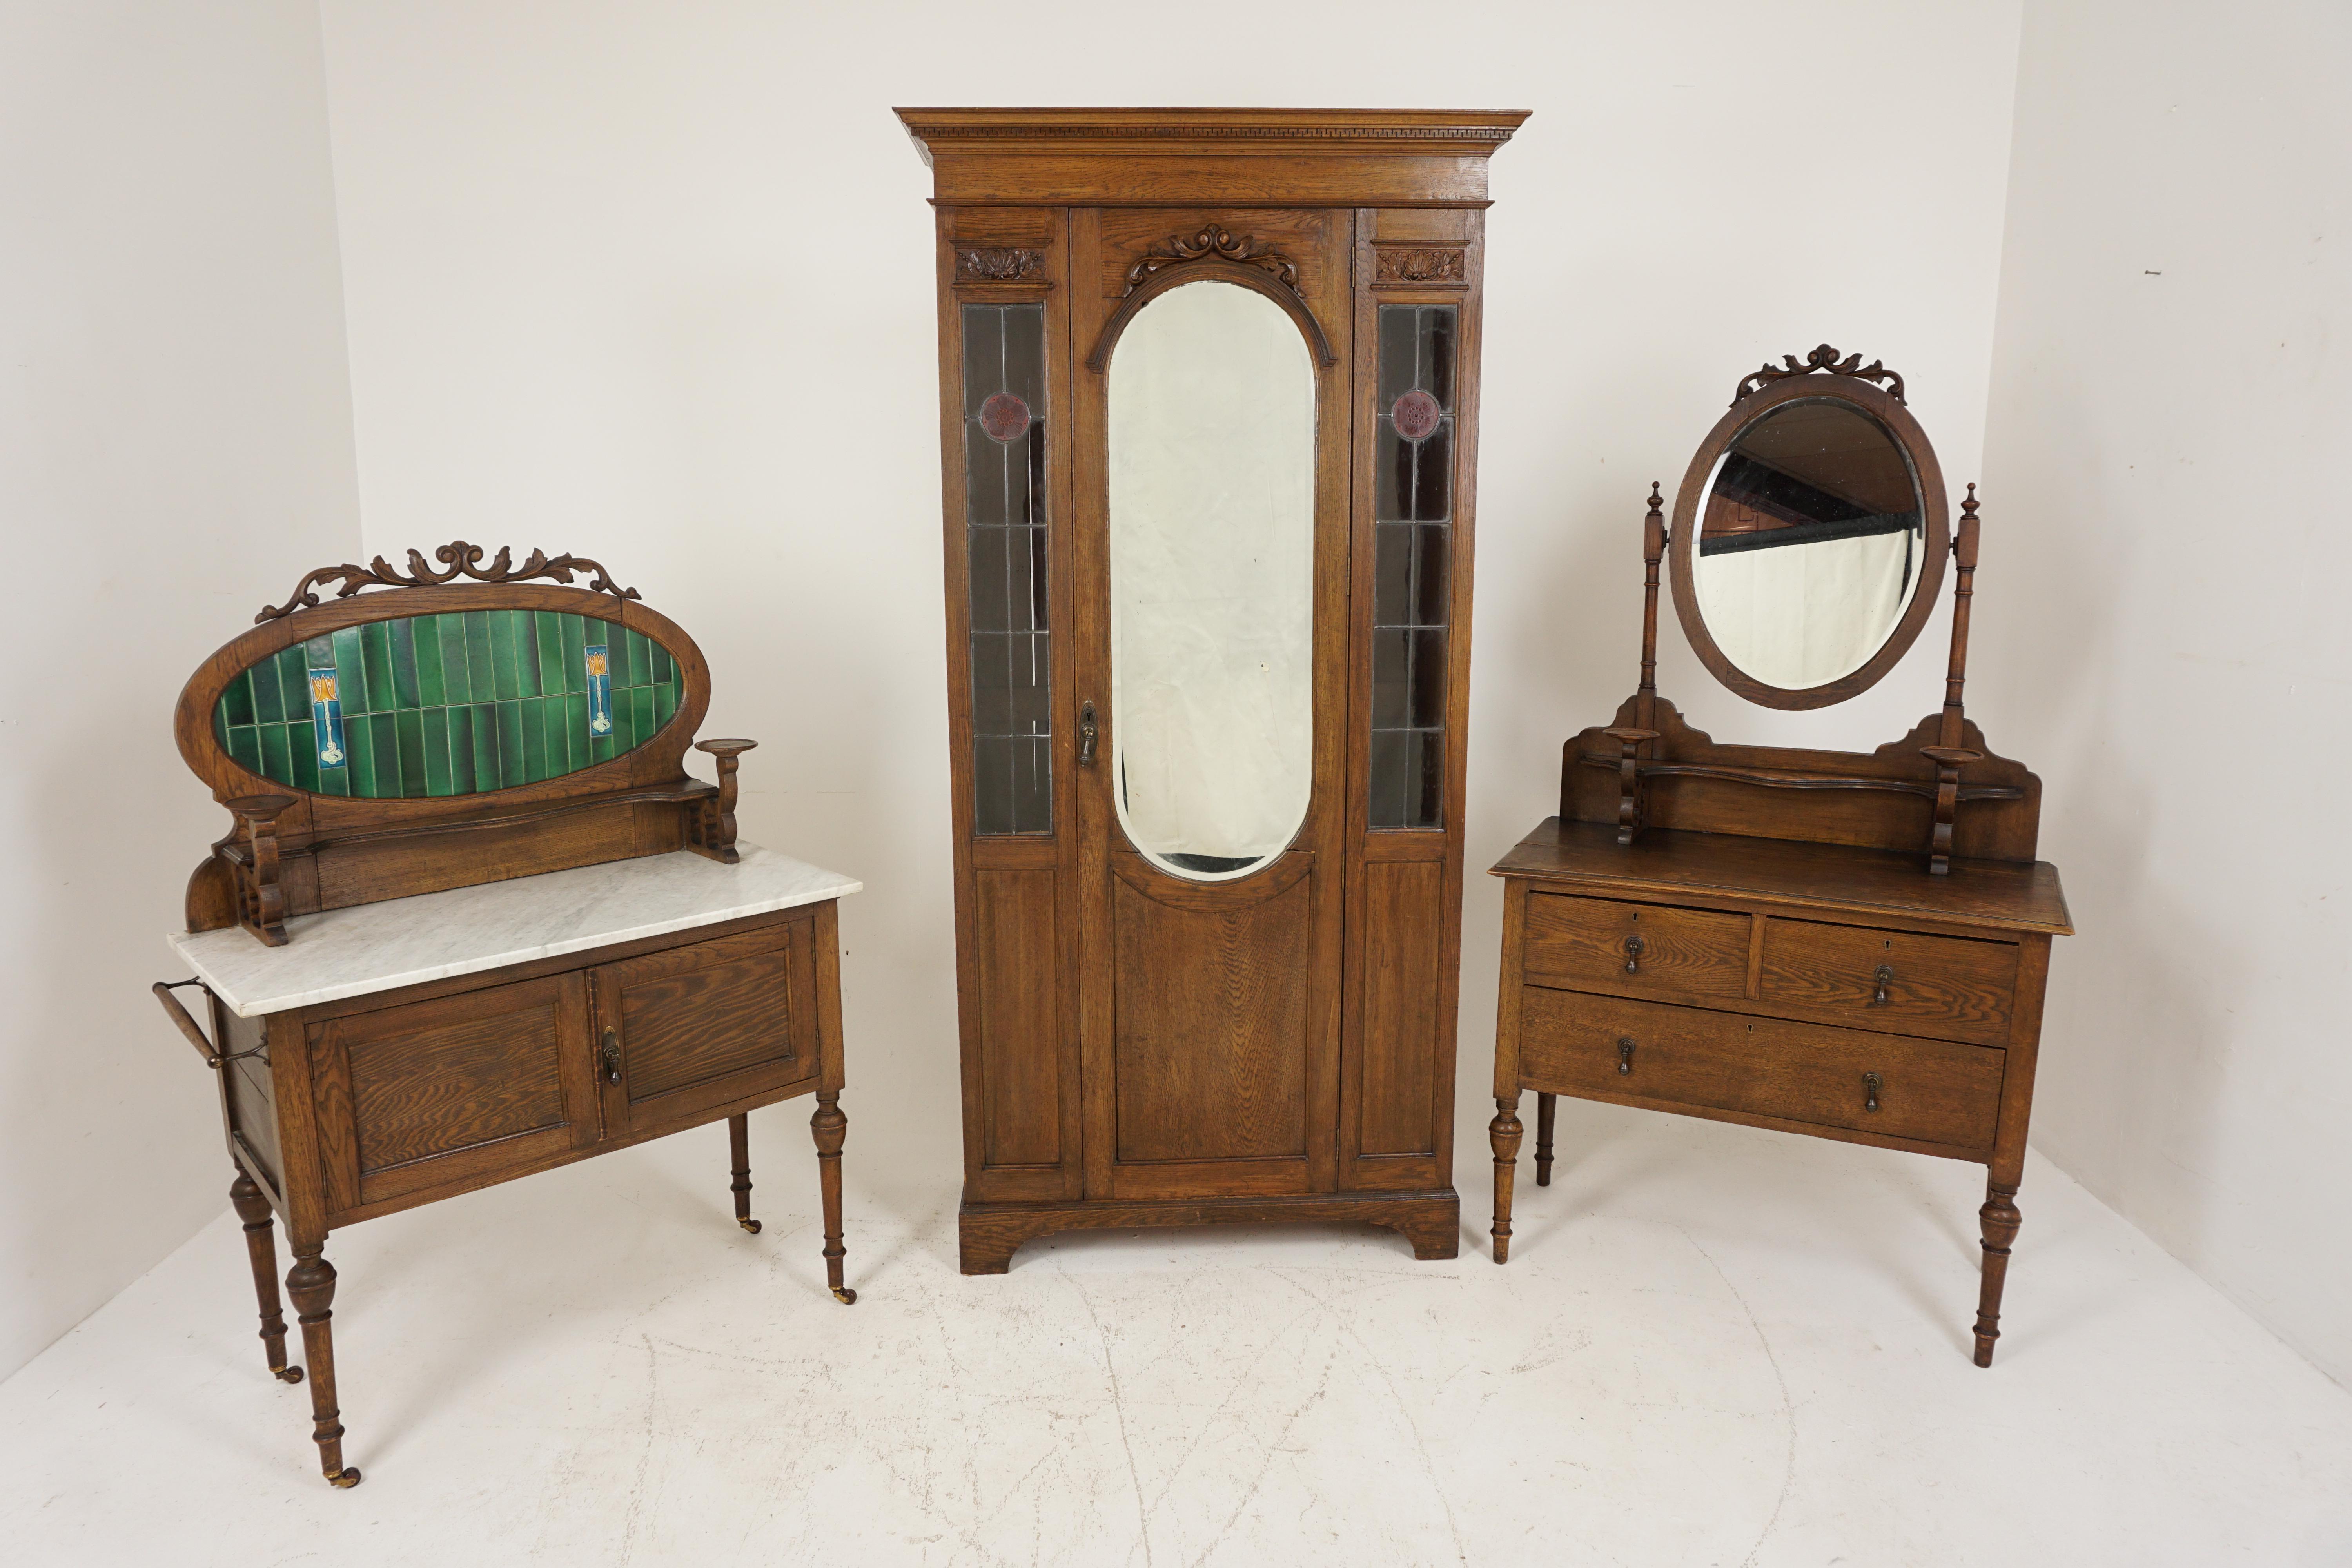 Antique Art Nouveau oak 3 piece bedroom suite, Scotland 1910, B2628

Scotland 1910

Solid oak
Original finish

Armoire with moulded cornice
Centre beveled mirror door flanked by pair of leaded glass panels 
With interior hanging